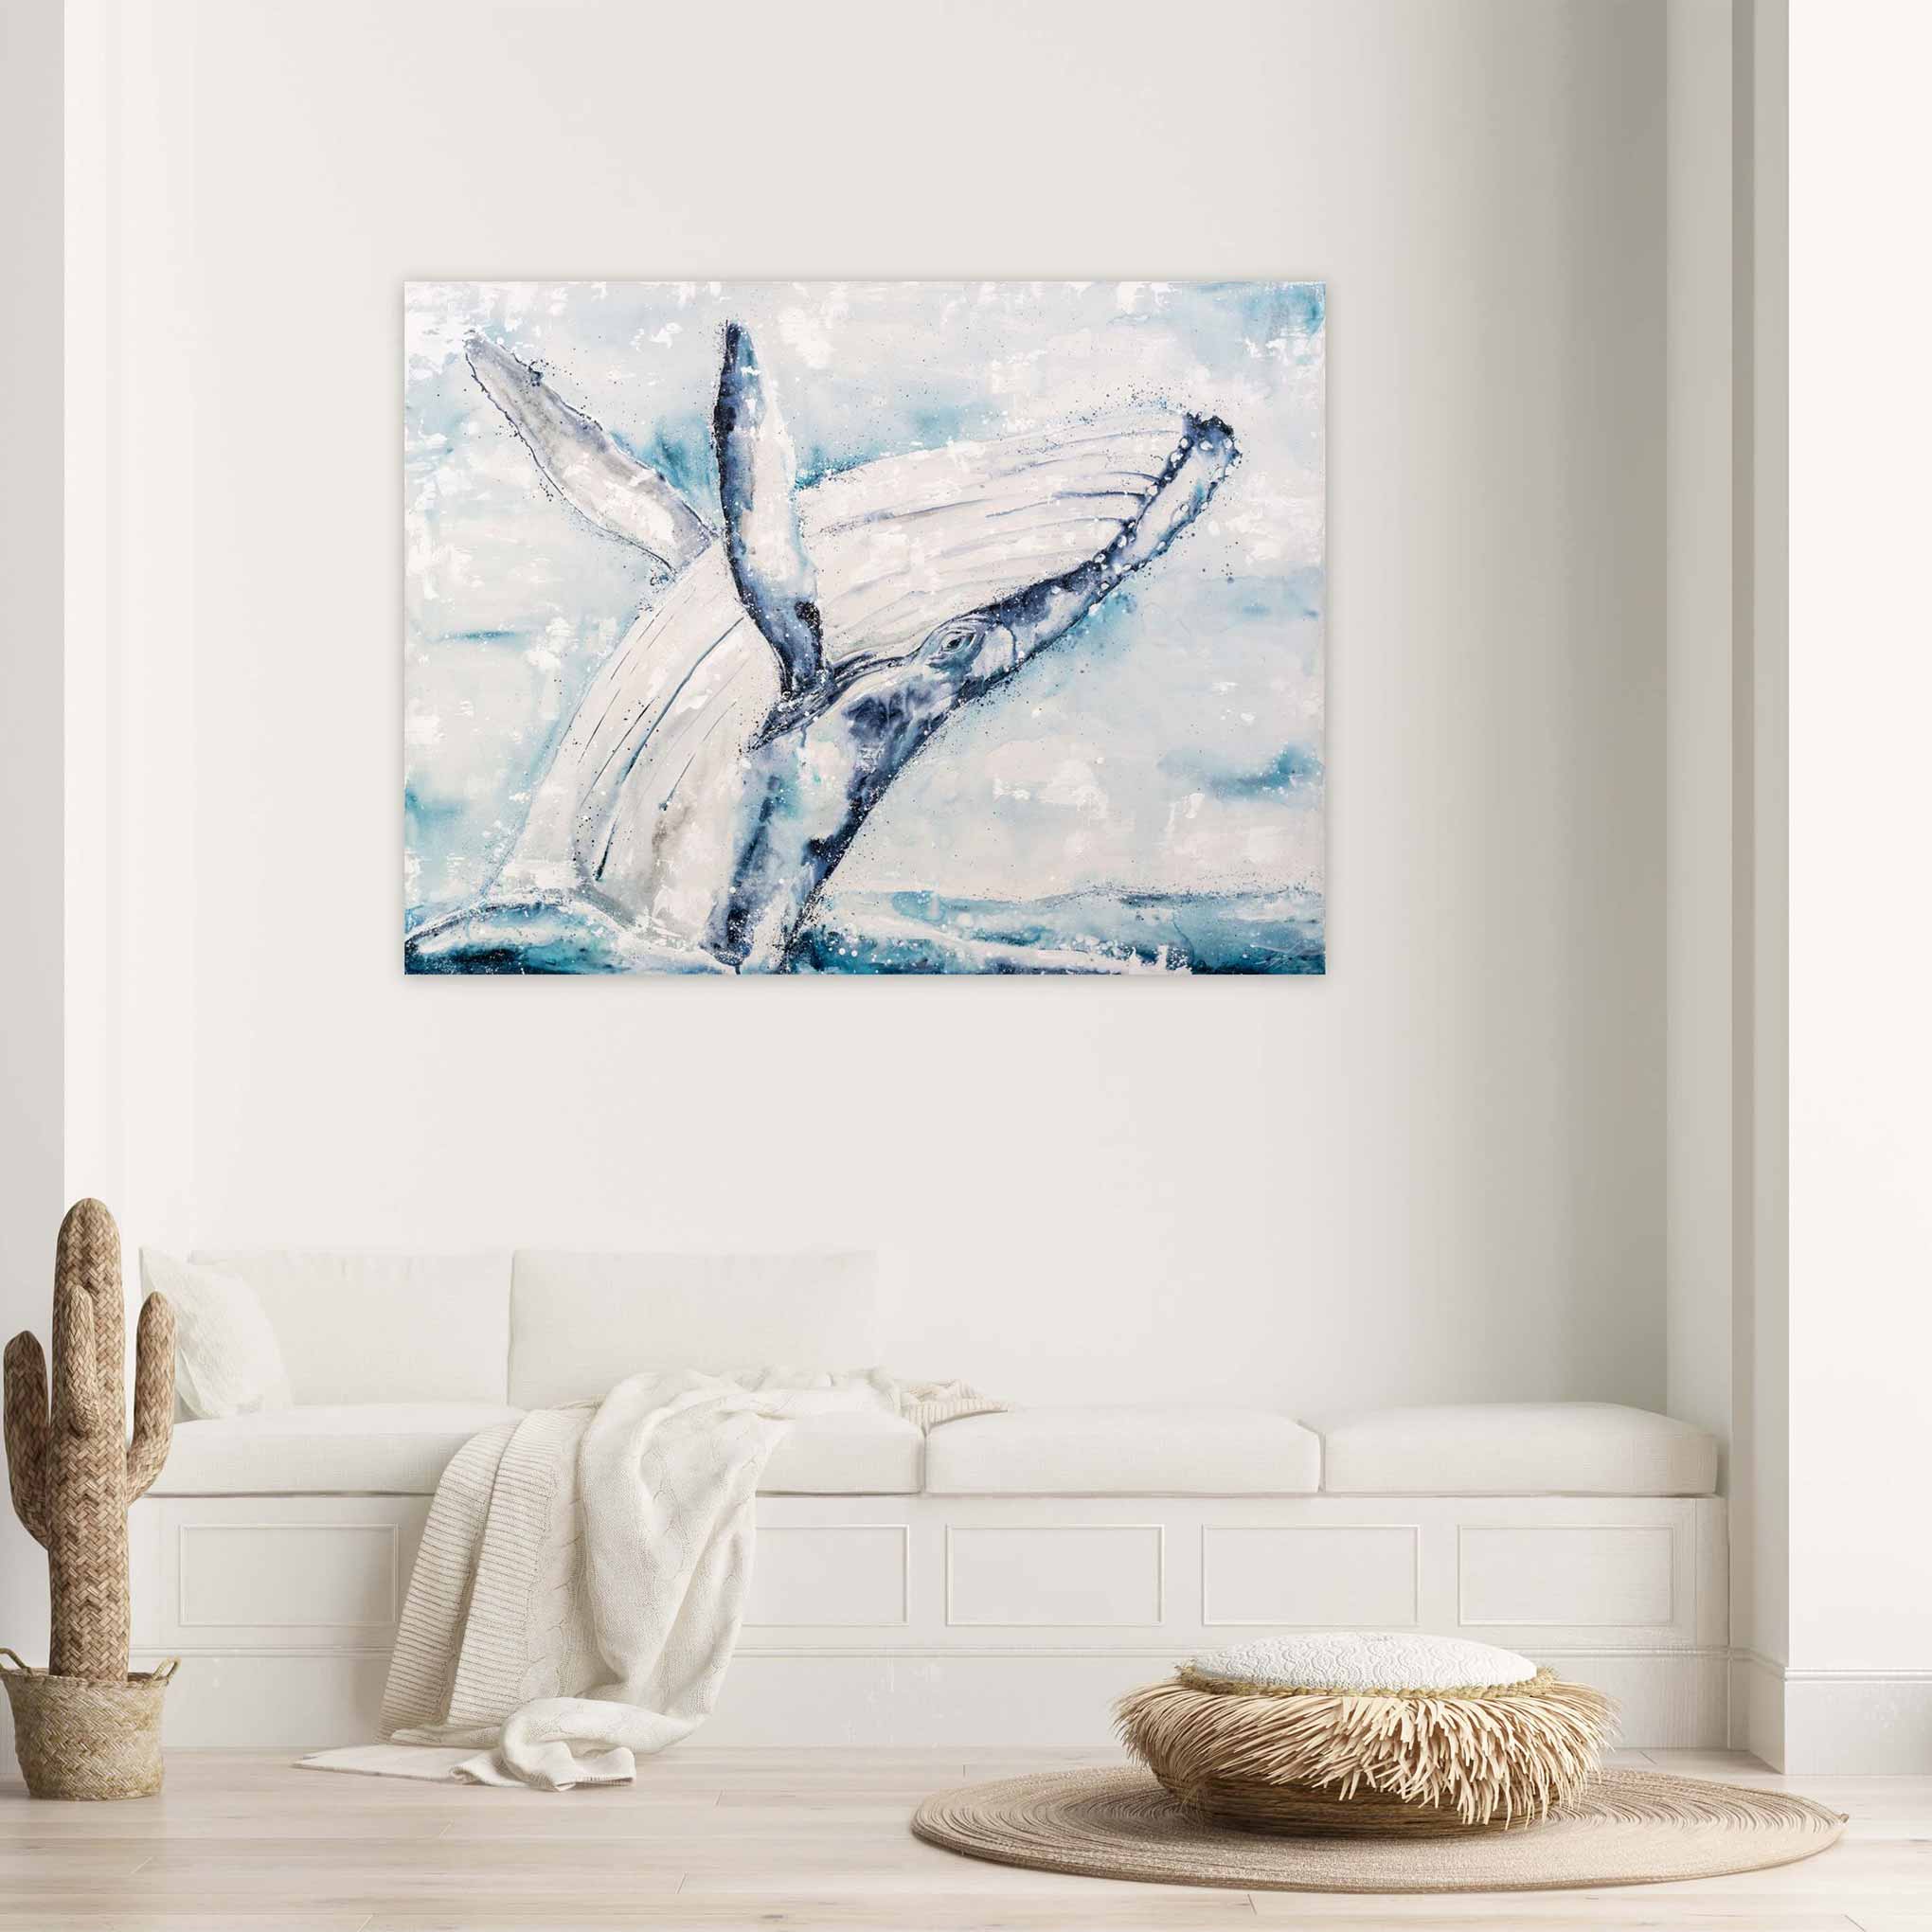 Whale canvas print above bench in lounge room